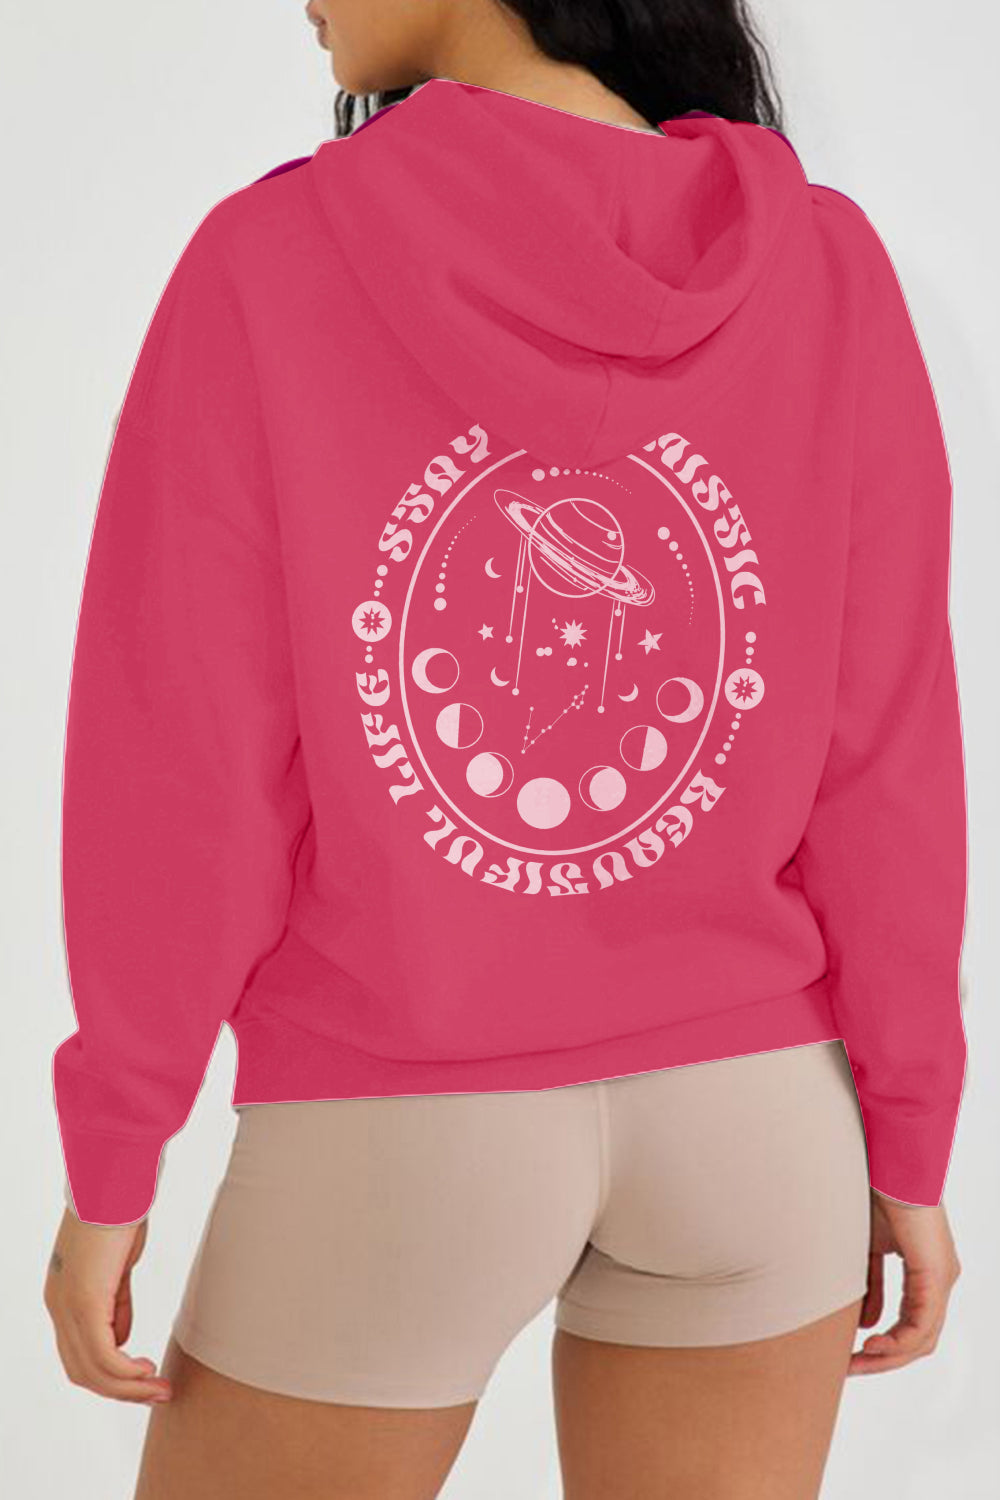 Maroon Simply Love Full Size STAY OPTIMISTIC BEAUTIFUL LIFE Graphic Hoodie